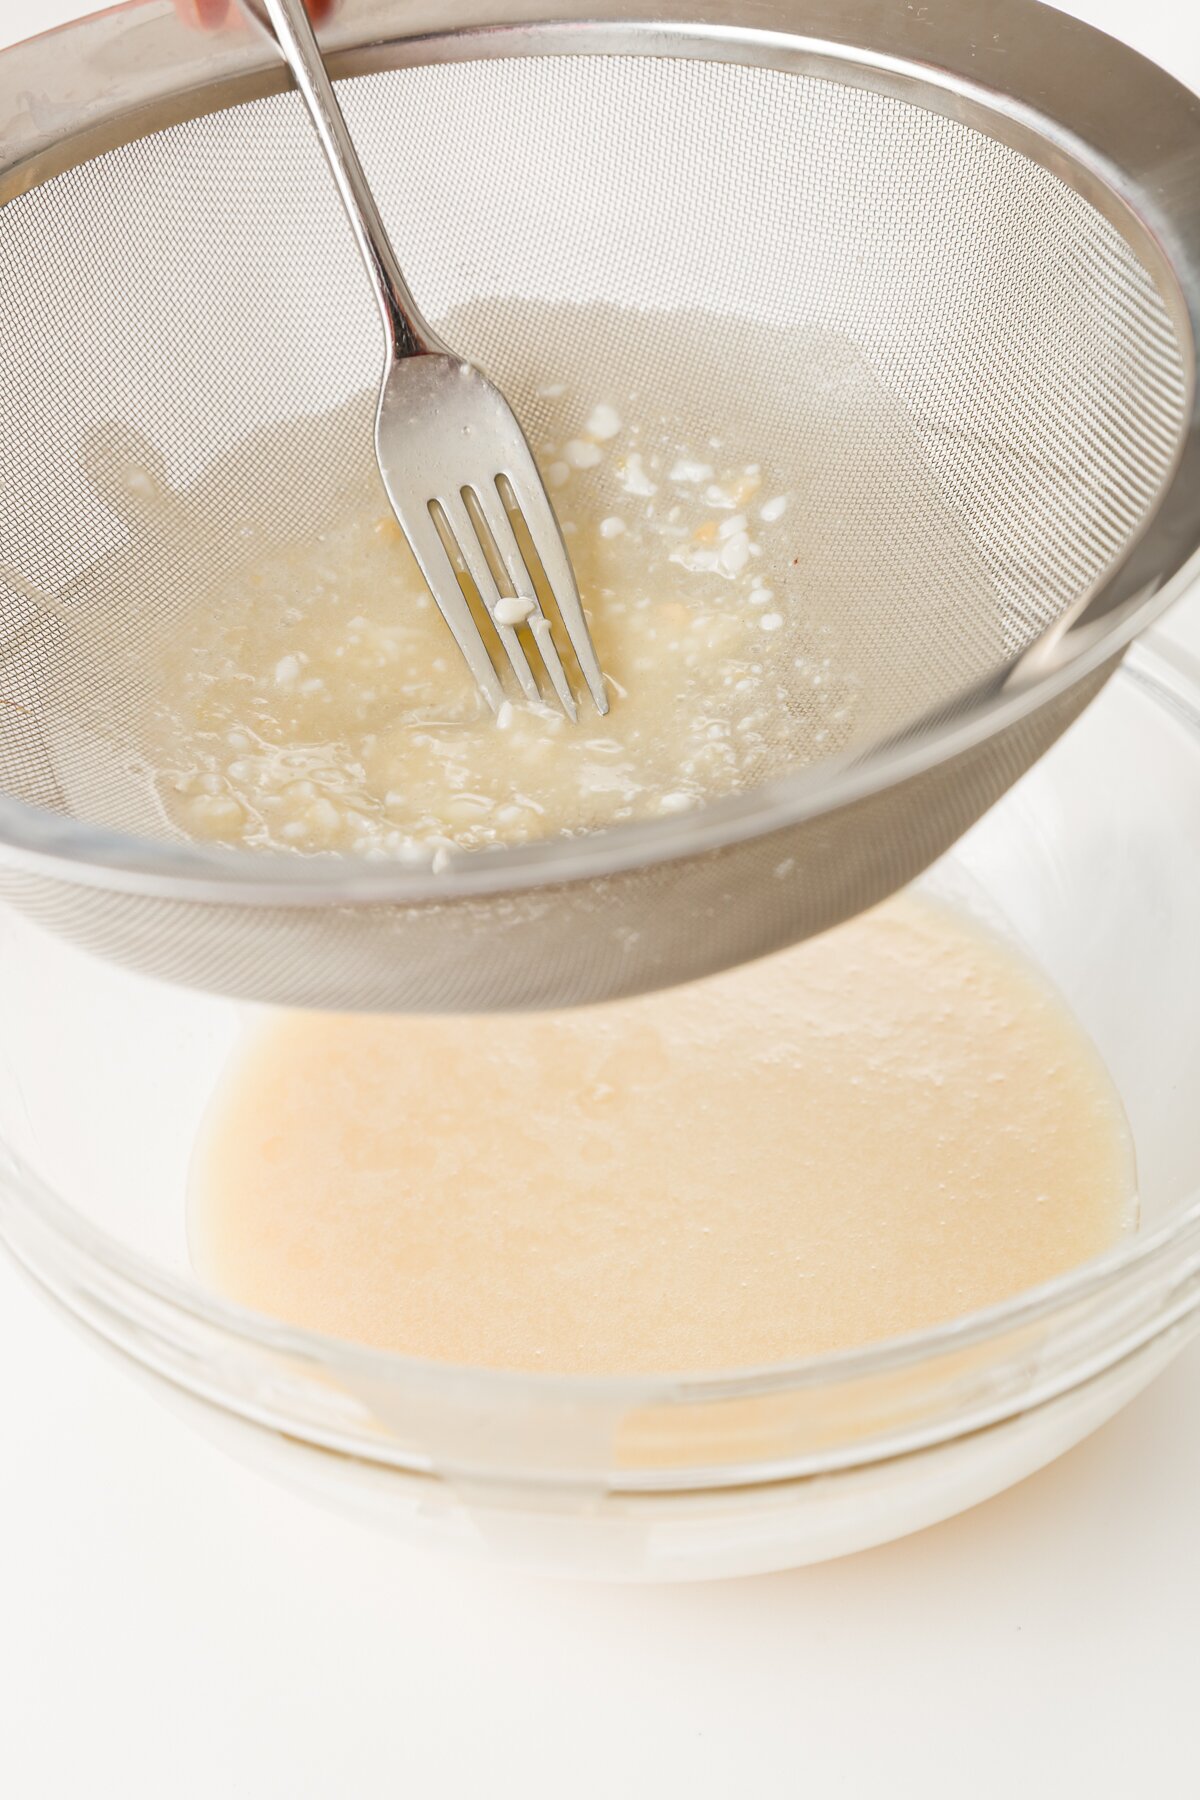 Pushing batter through a sieve with a fork